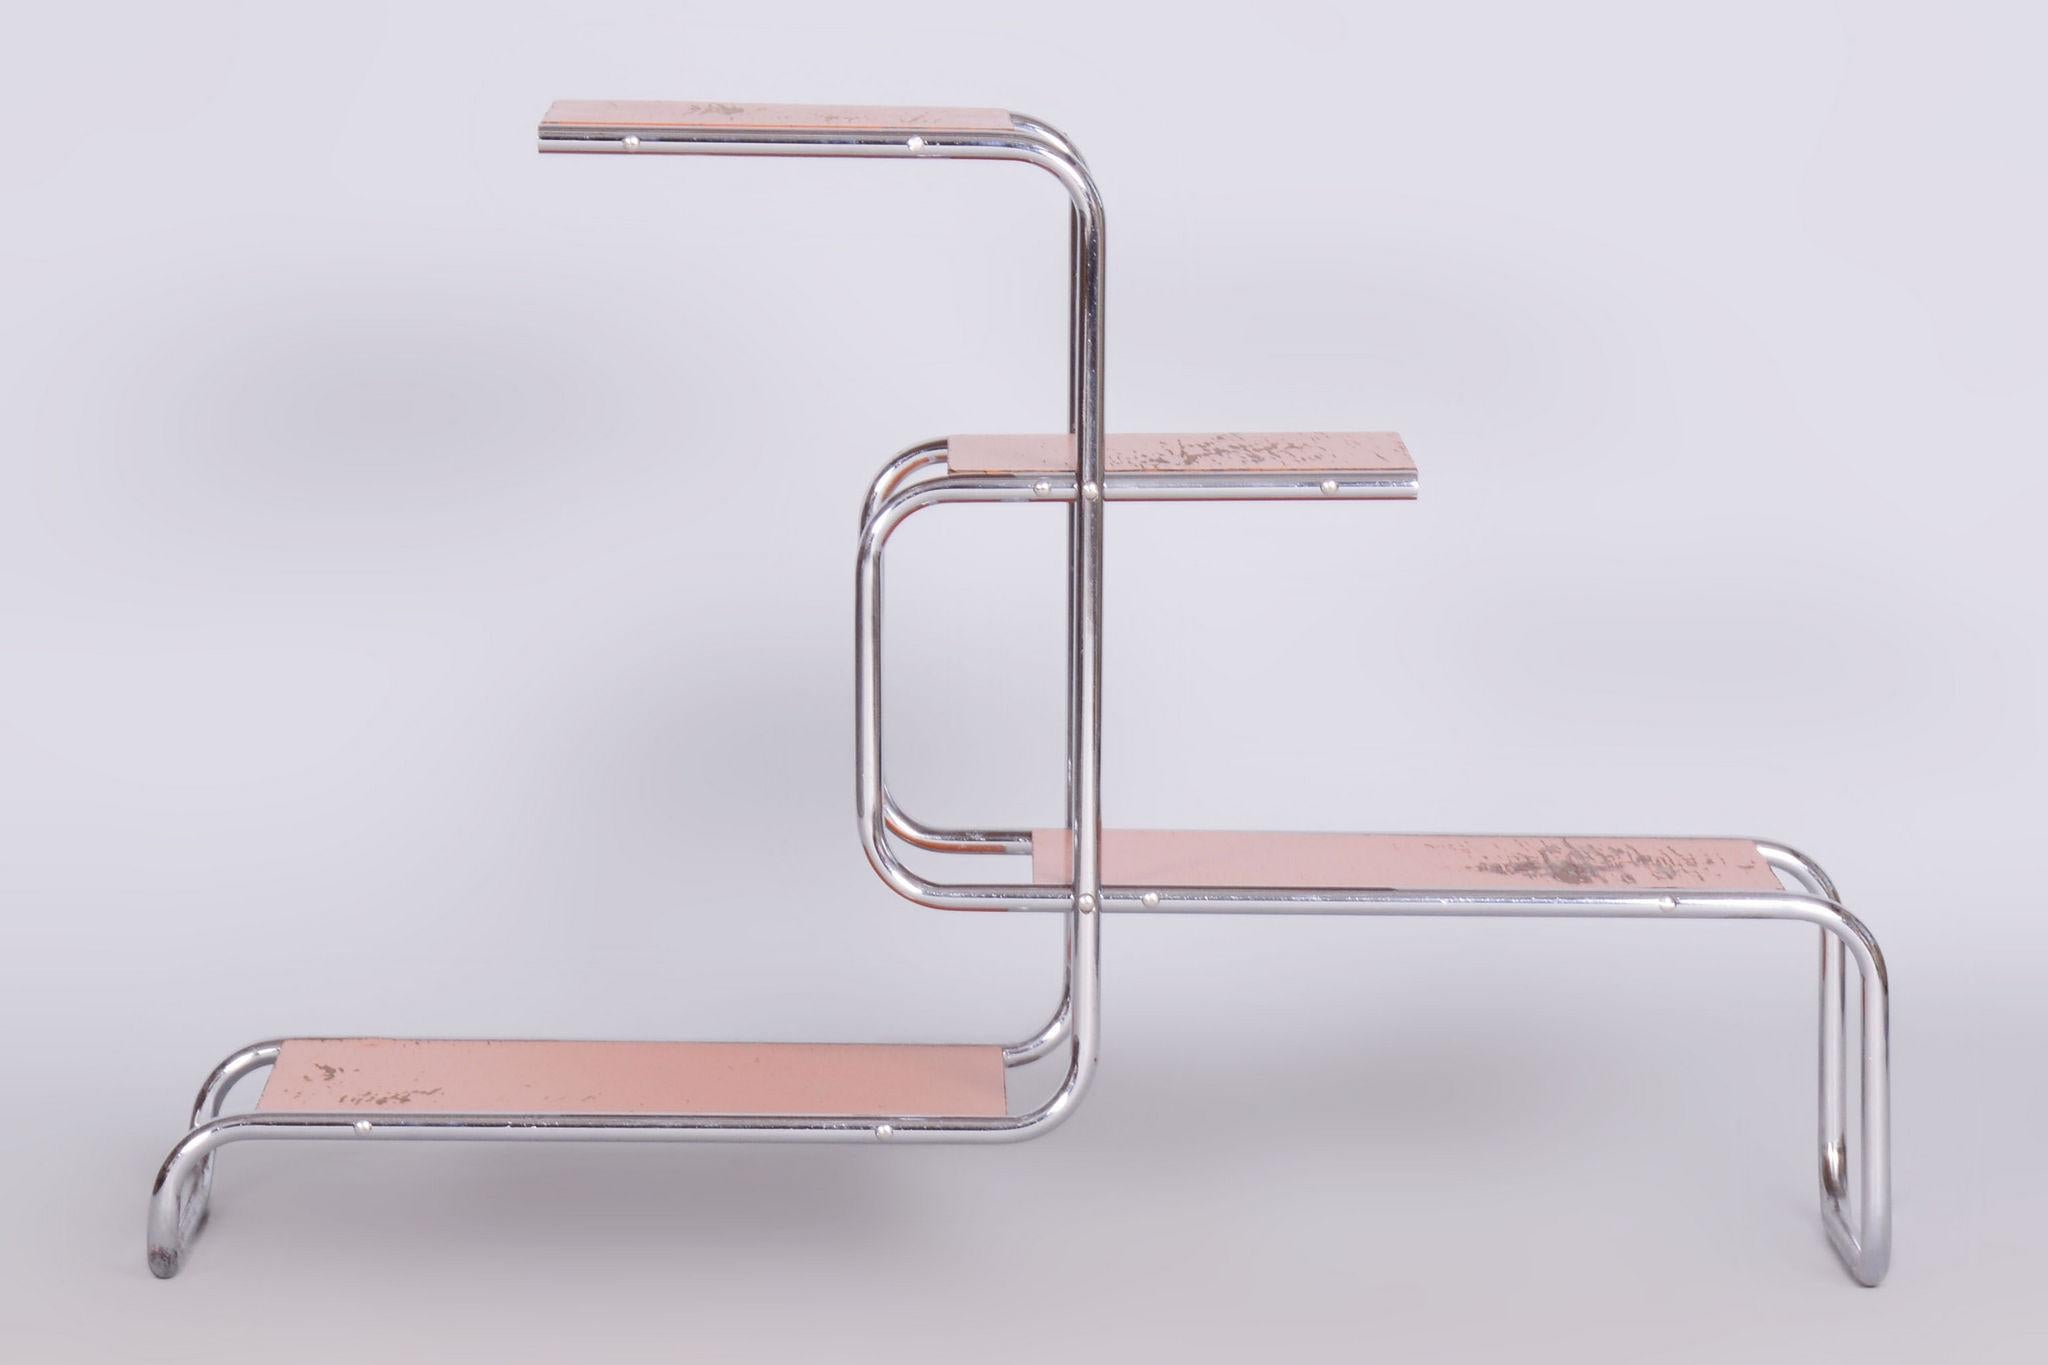 Restored Bauhaus Étagère, Chrome-Plated Steel, Lacquered Wood, Czechia, 1930s In Good Condition For Sale In Horomerice, CZ